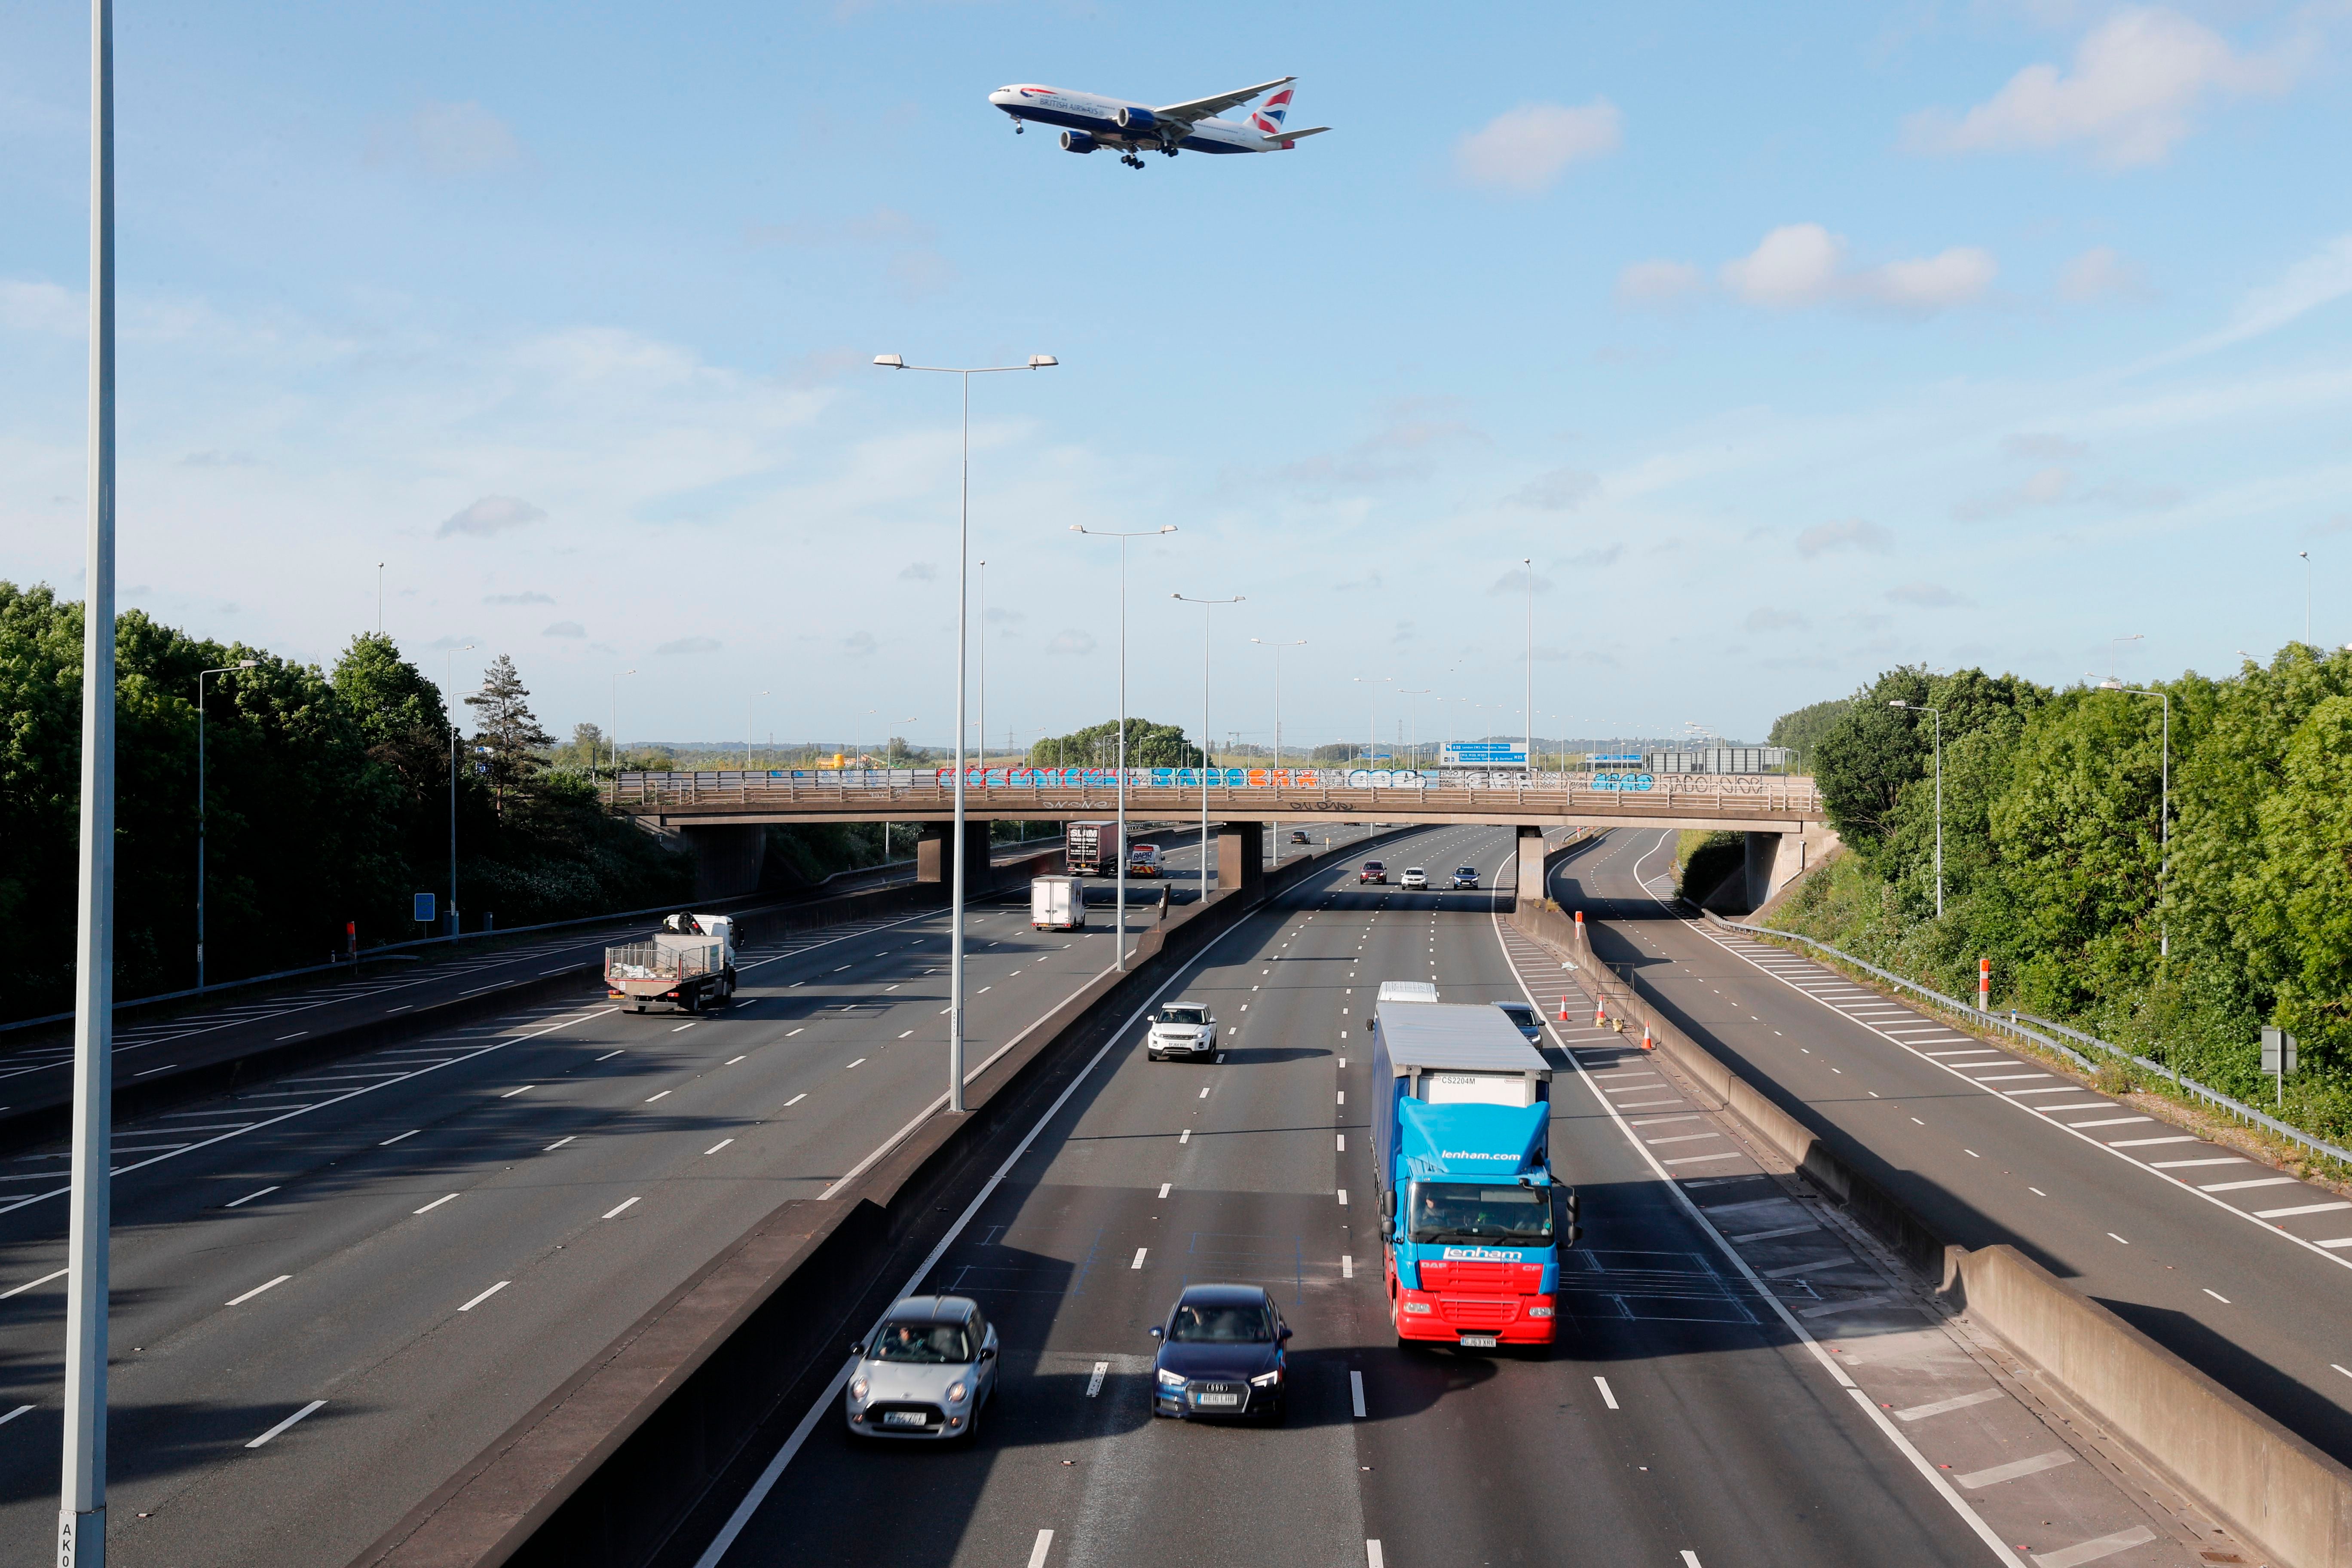 Traffic is seen on the M25 motorway as a plane flies overhead during the morning rush hour near Heathrow Airport in west of London on May 11, 2020.